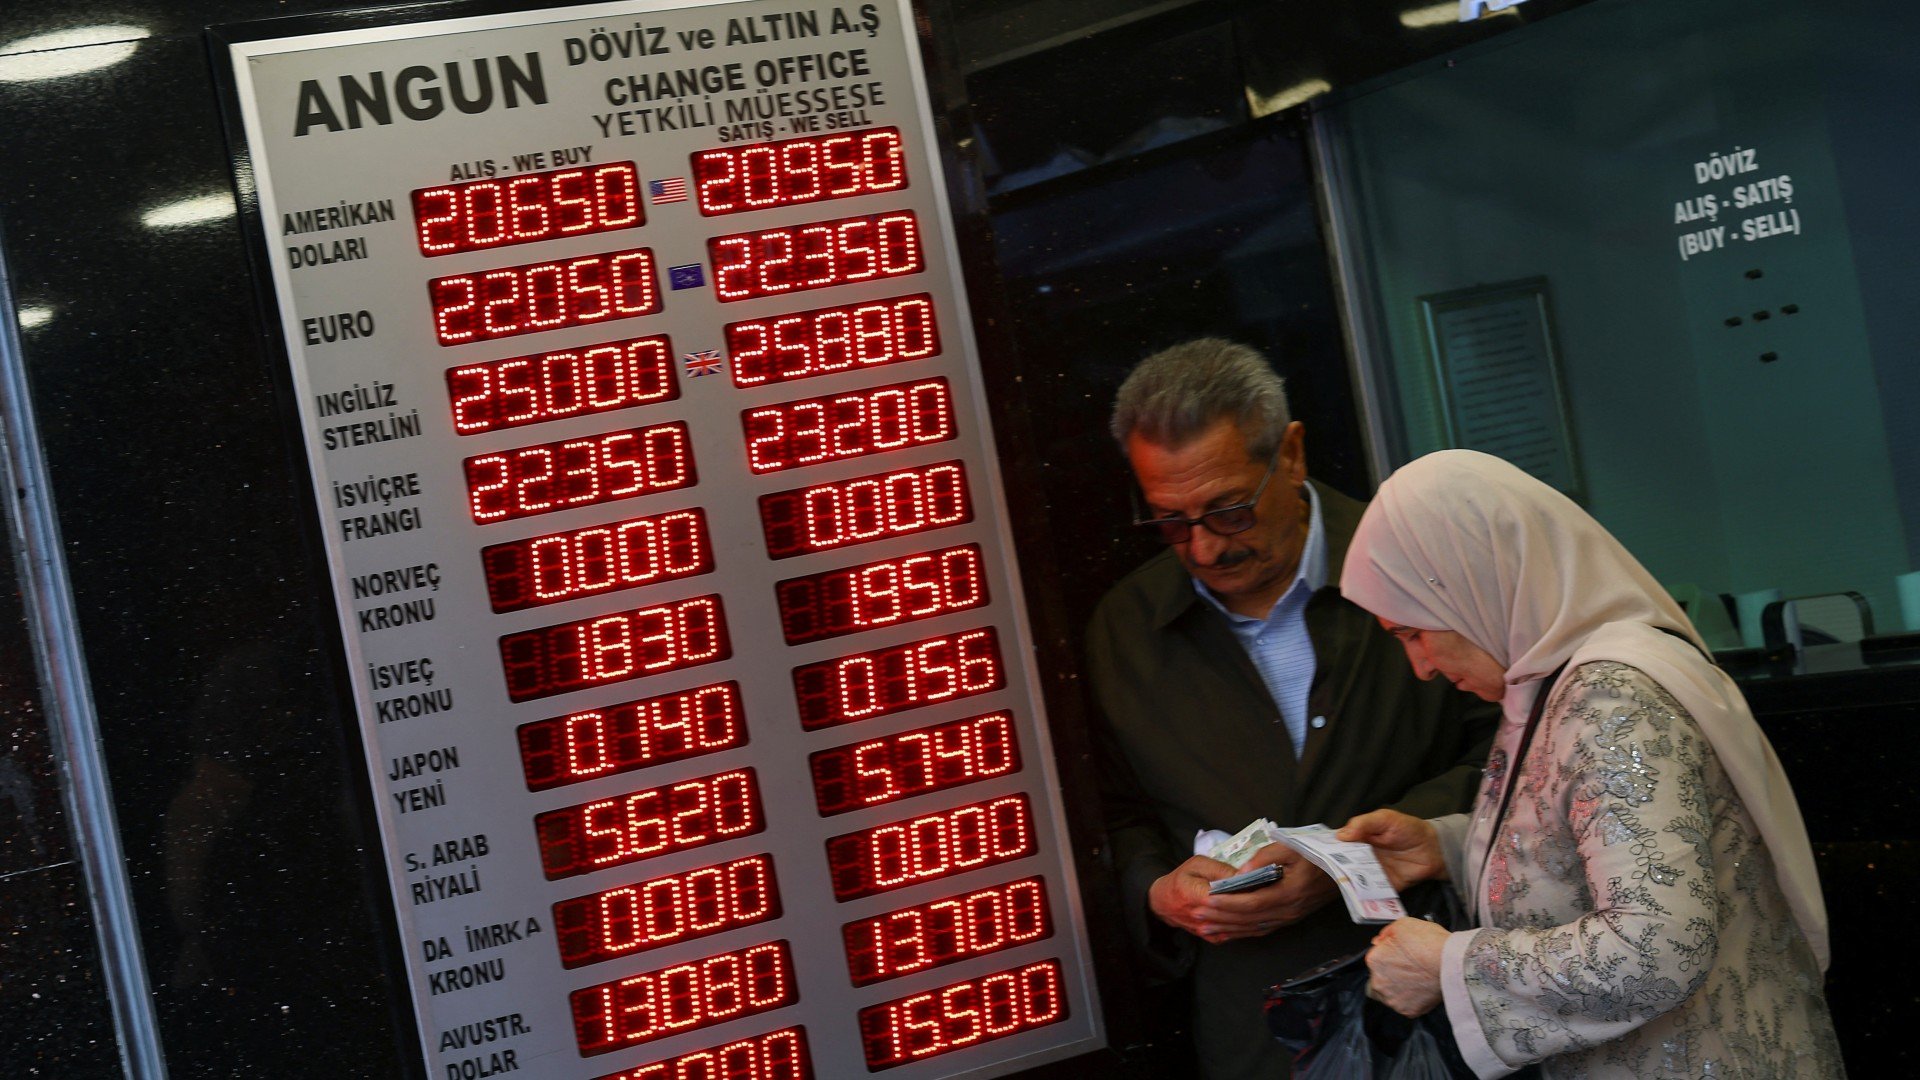 People visit a currency exchange office, after Turkish President Recep Tayyip Erdogan was declared the winner in the second round of the presidential election, in Istanbul, on 29 May (Reuters)